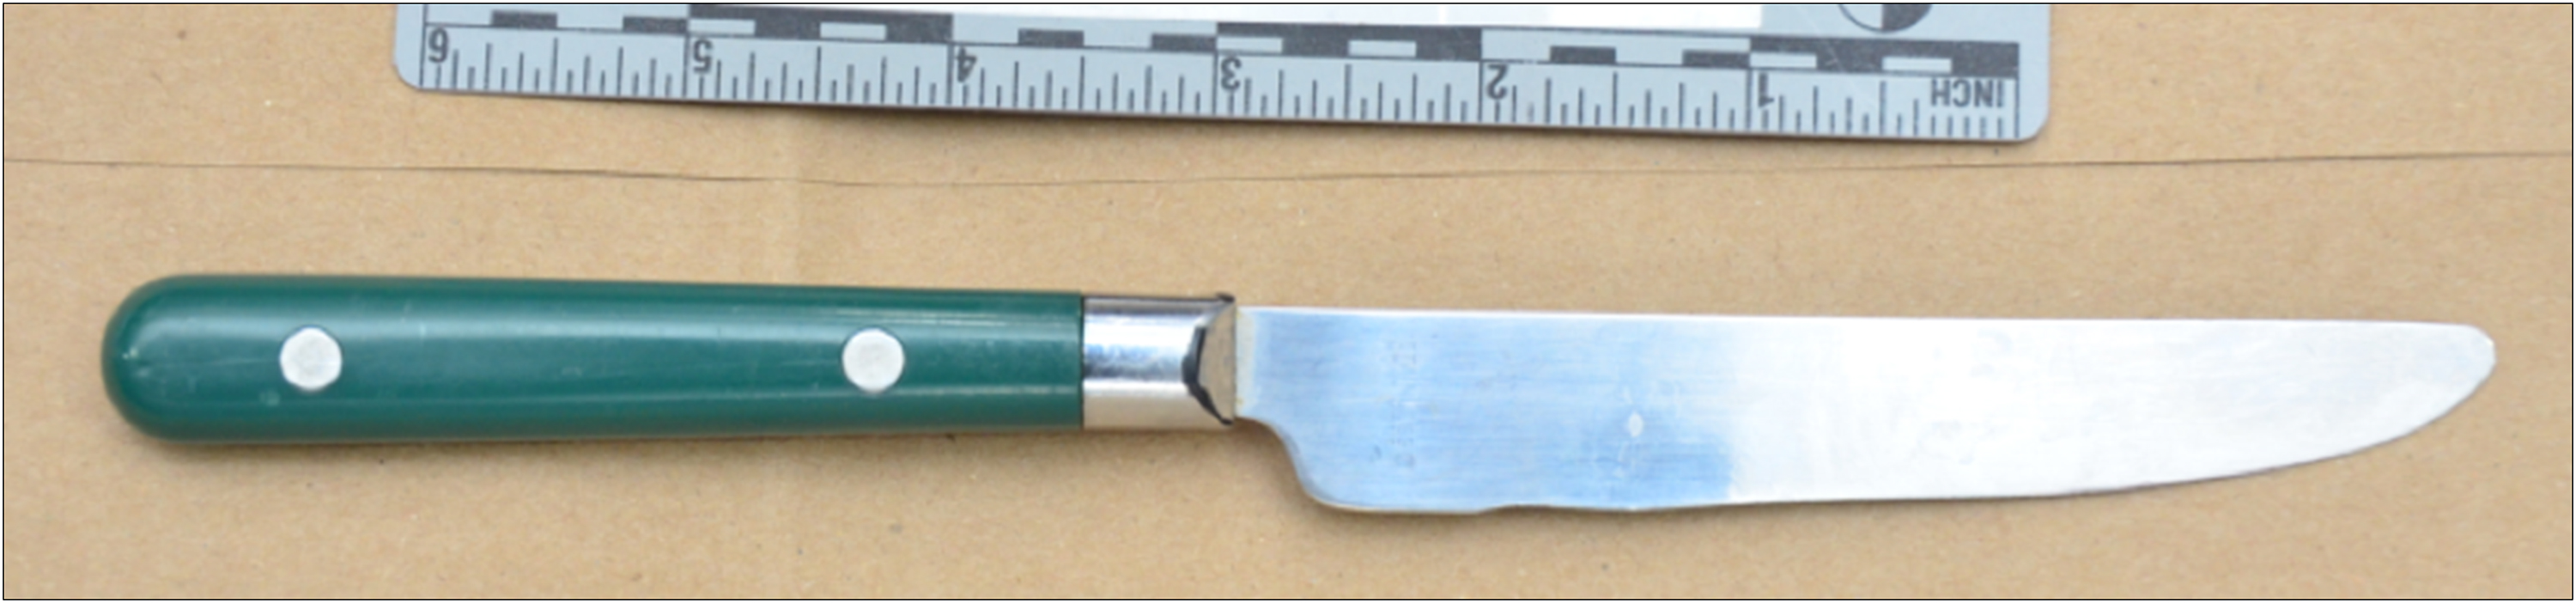 photo of the knife seized from the bedroom